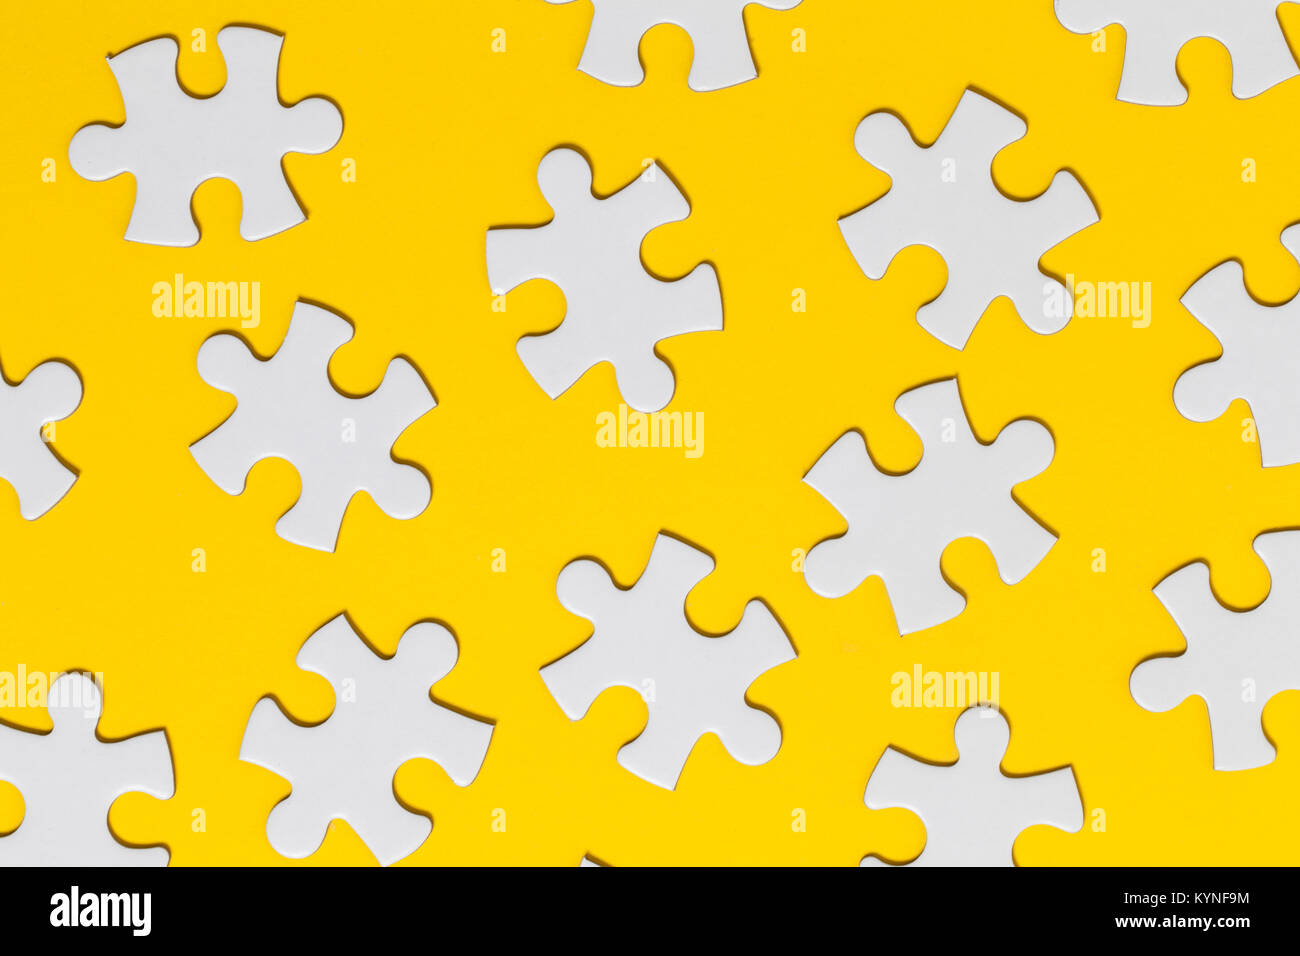 White jigsaw puzzle pieces on a yellow background. Business solution concept Stock Photo